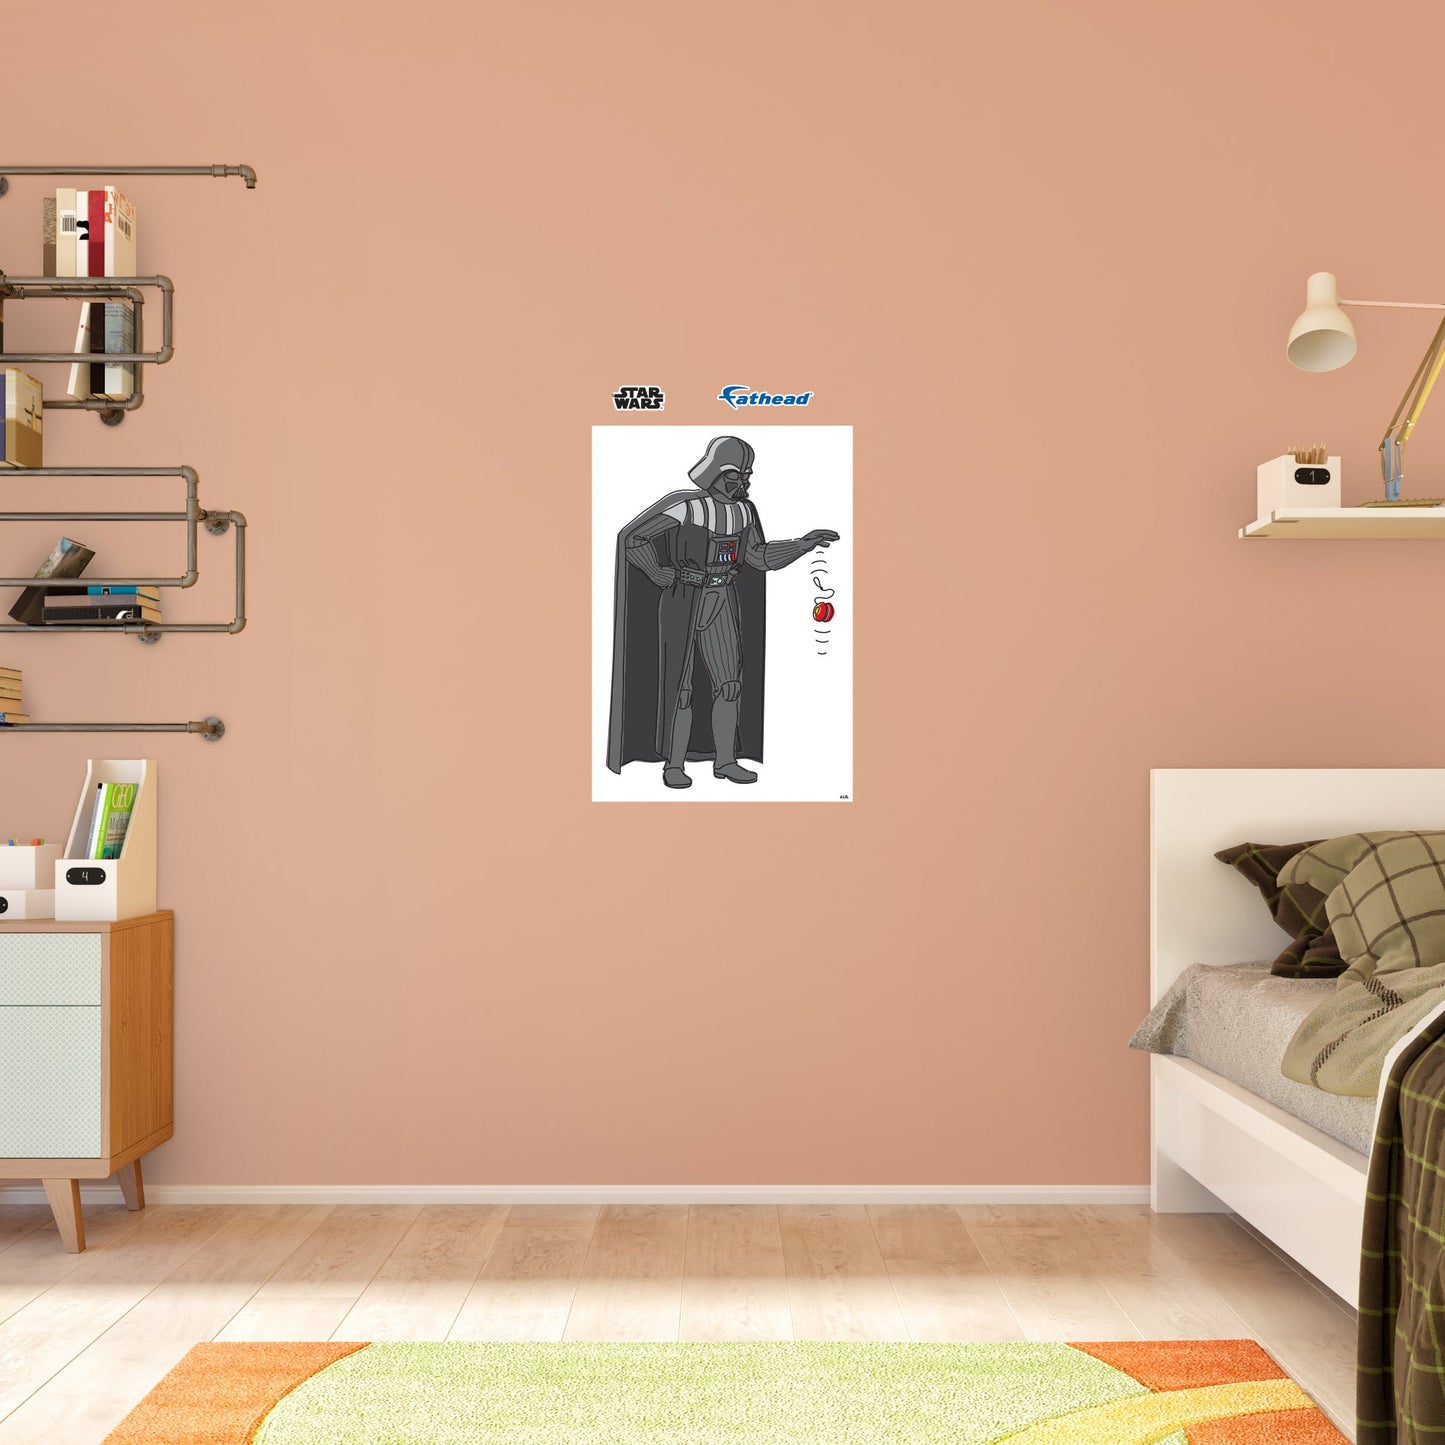 Darth Vader Playing With YoyoPoster        - Officially Licensed Star Wars Removable     Adhesive Decal